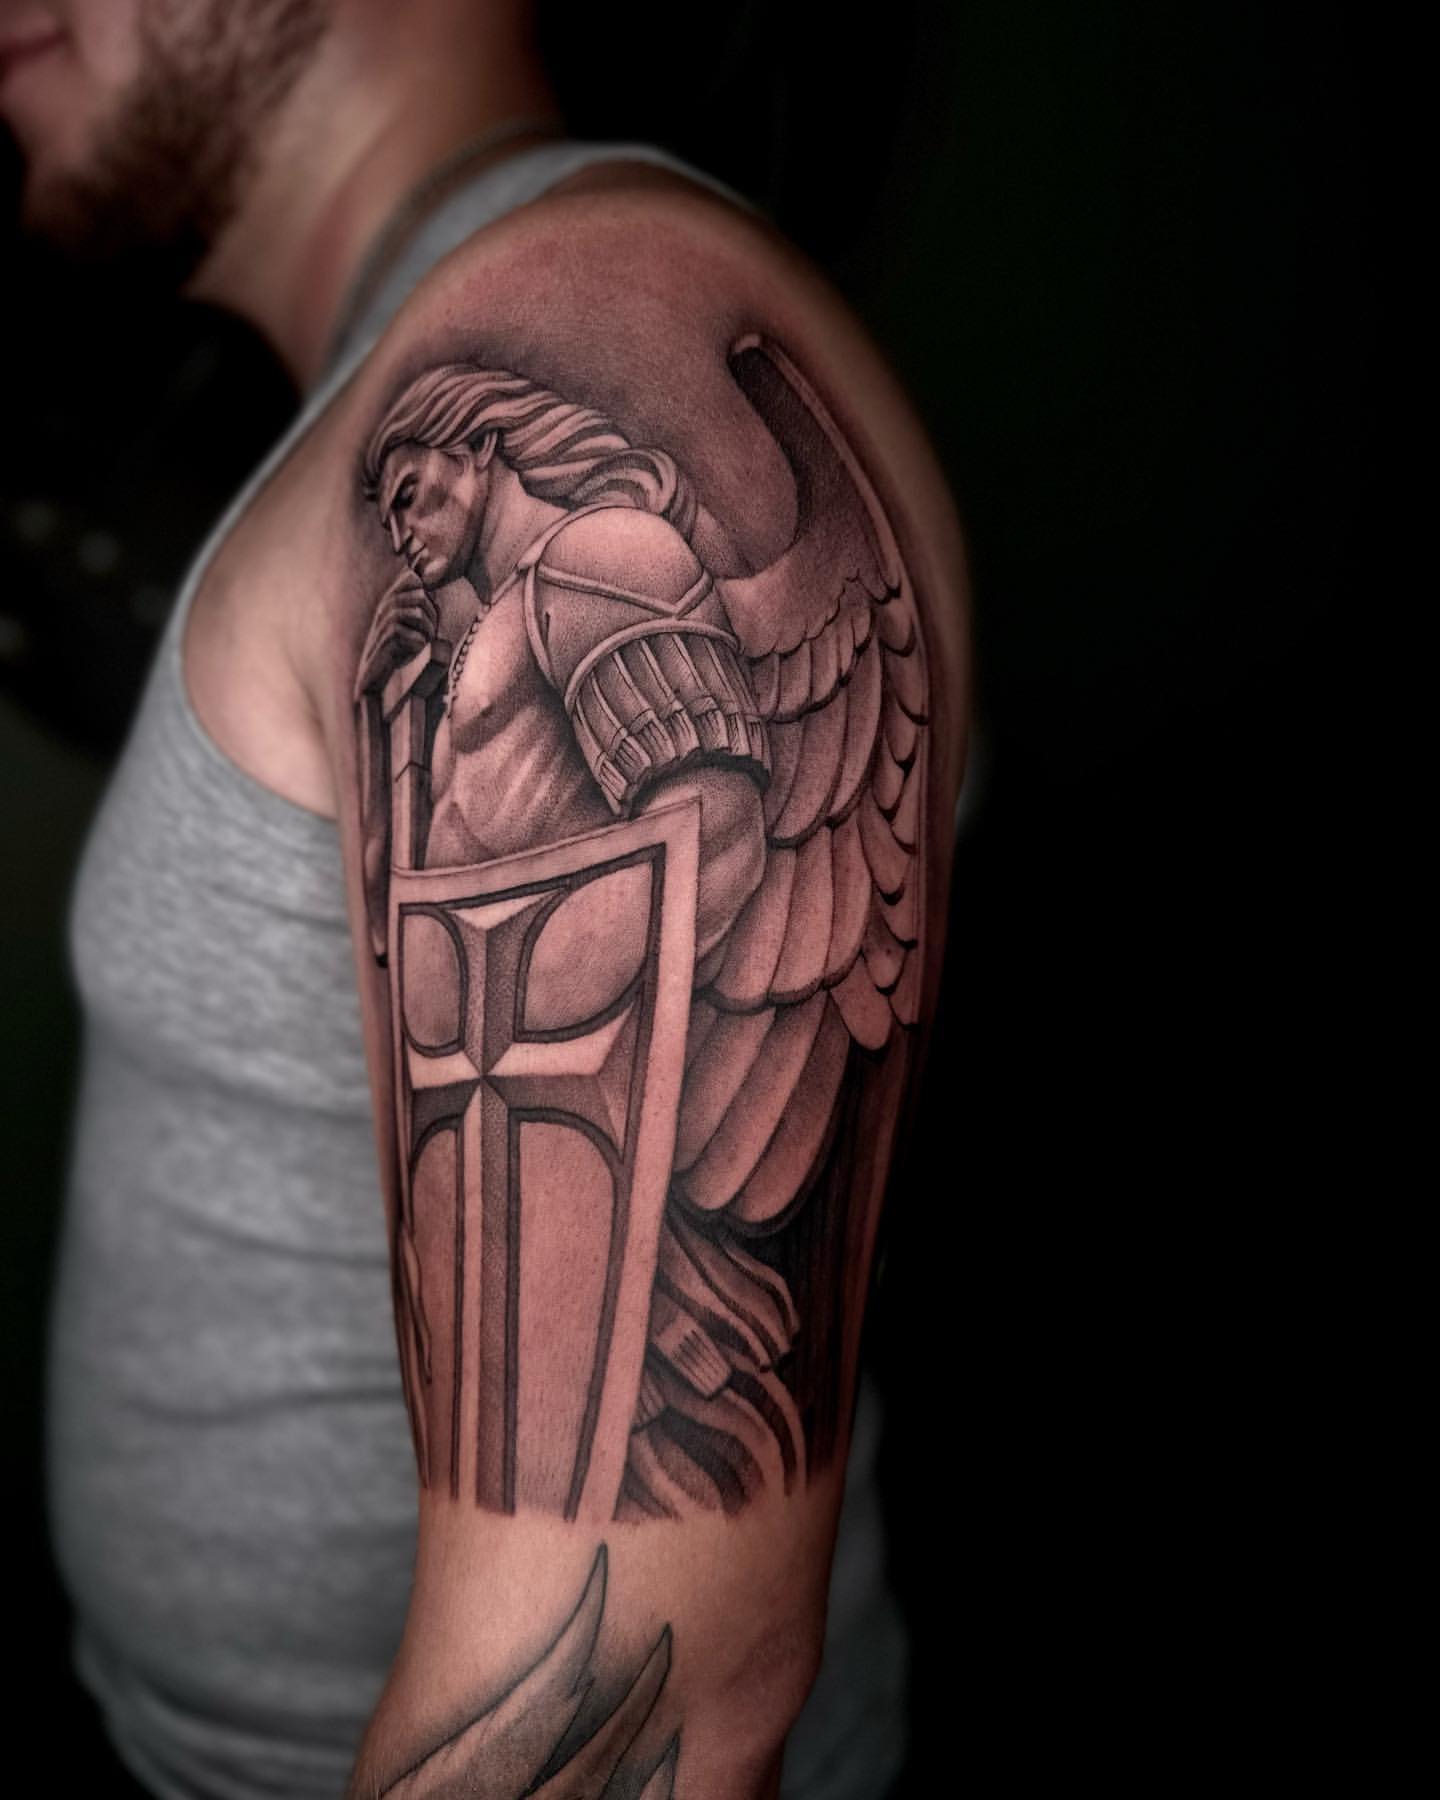 Guided by my guardian angel, protected and blessed. 🕊️  #GuardianAngelTattoo #InkedProtection #DivineGuidance #TattooArtistry” |  Instagram